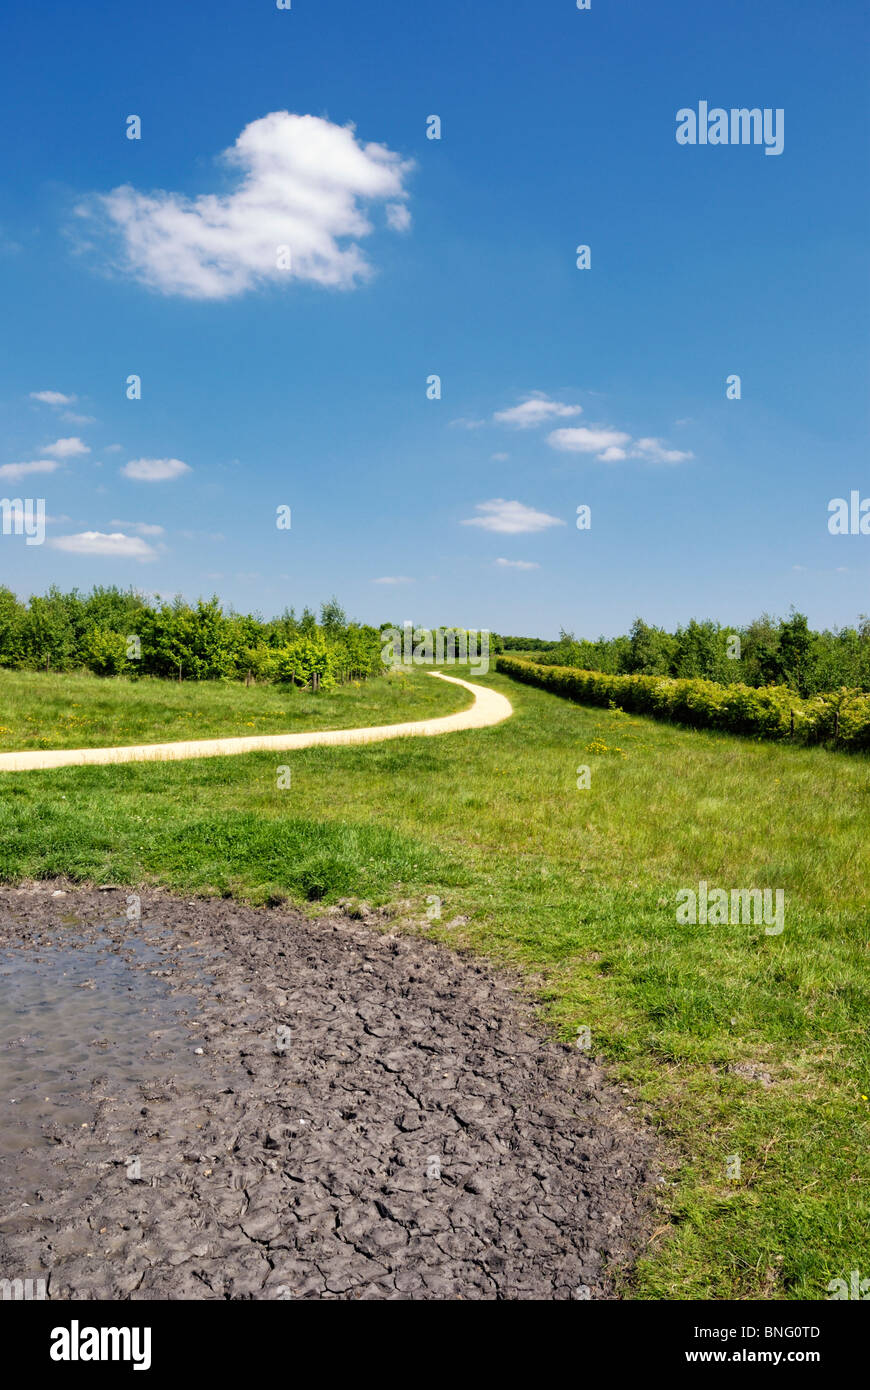 small pond drying out in hot weather Stock Photo